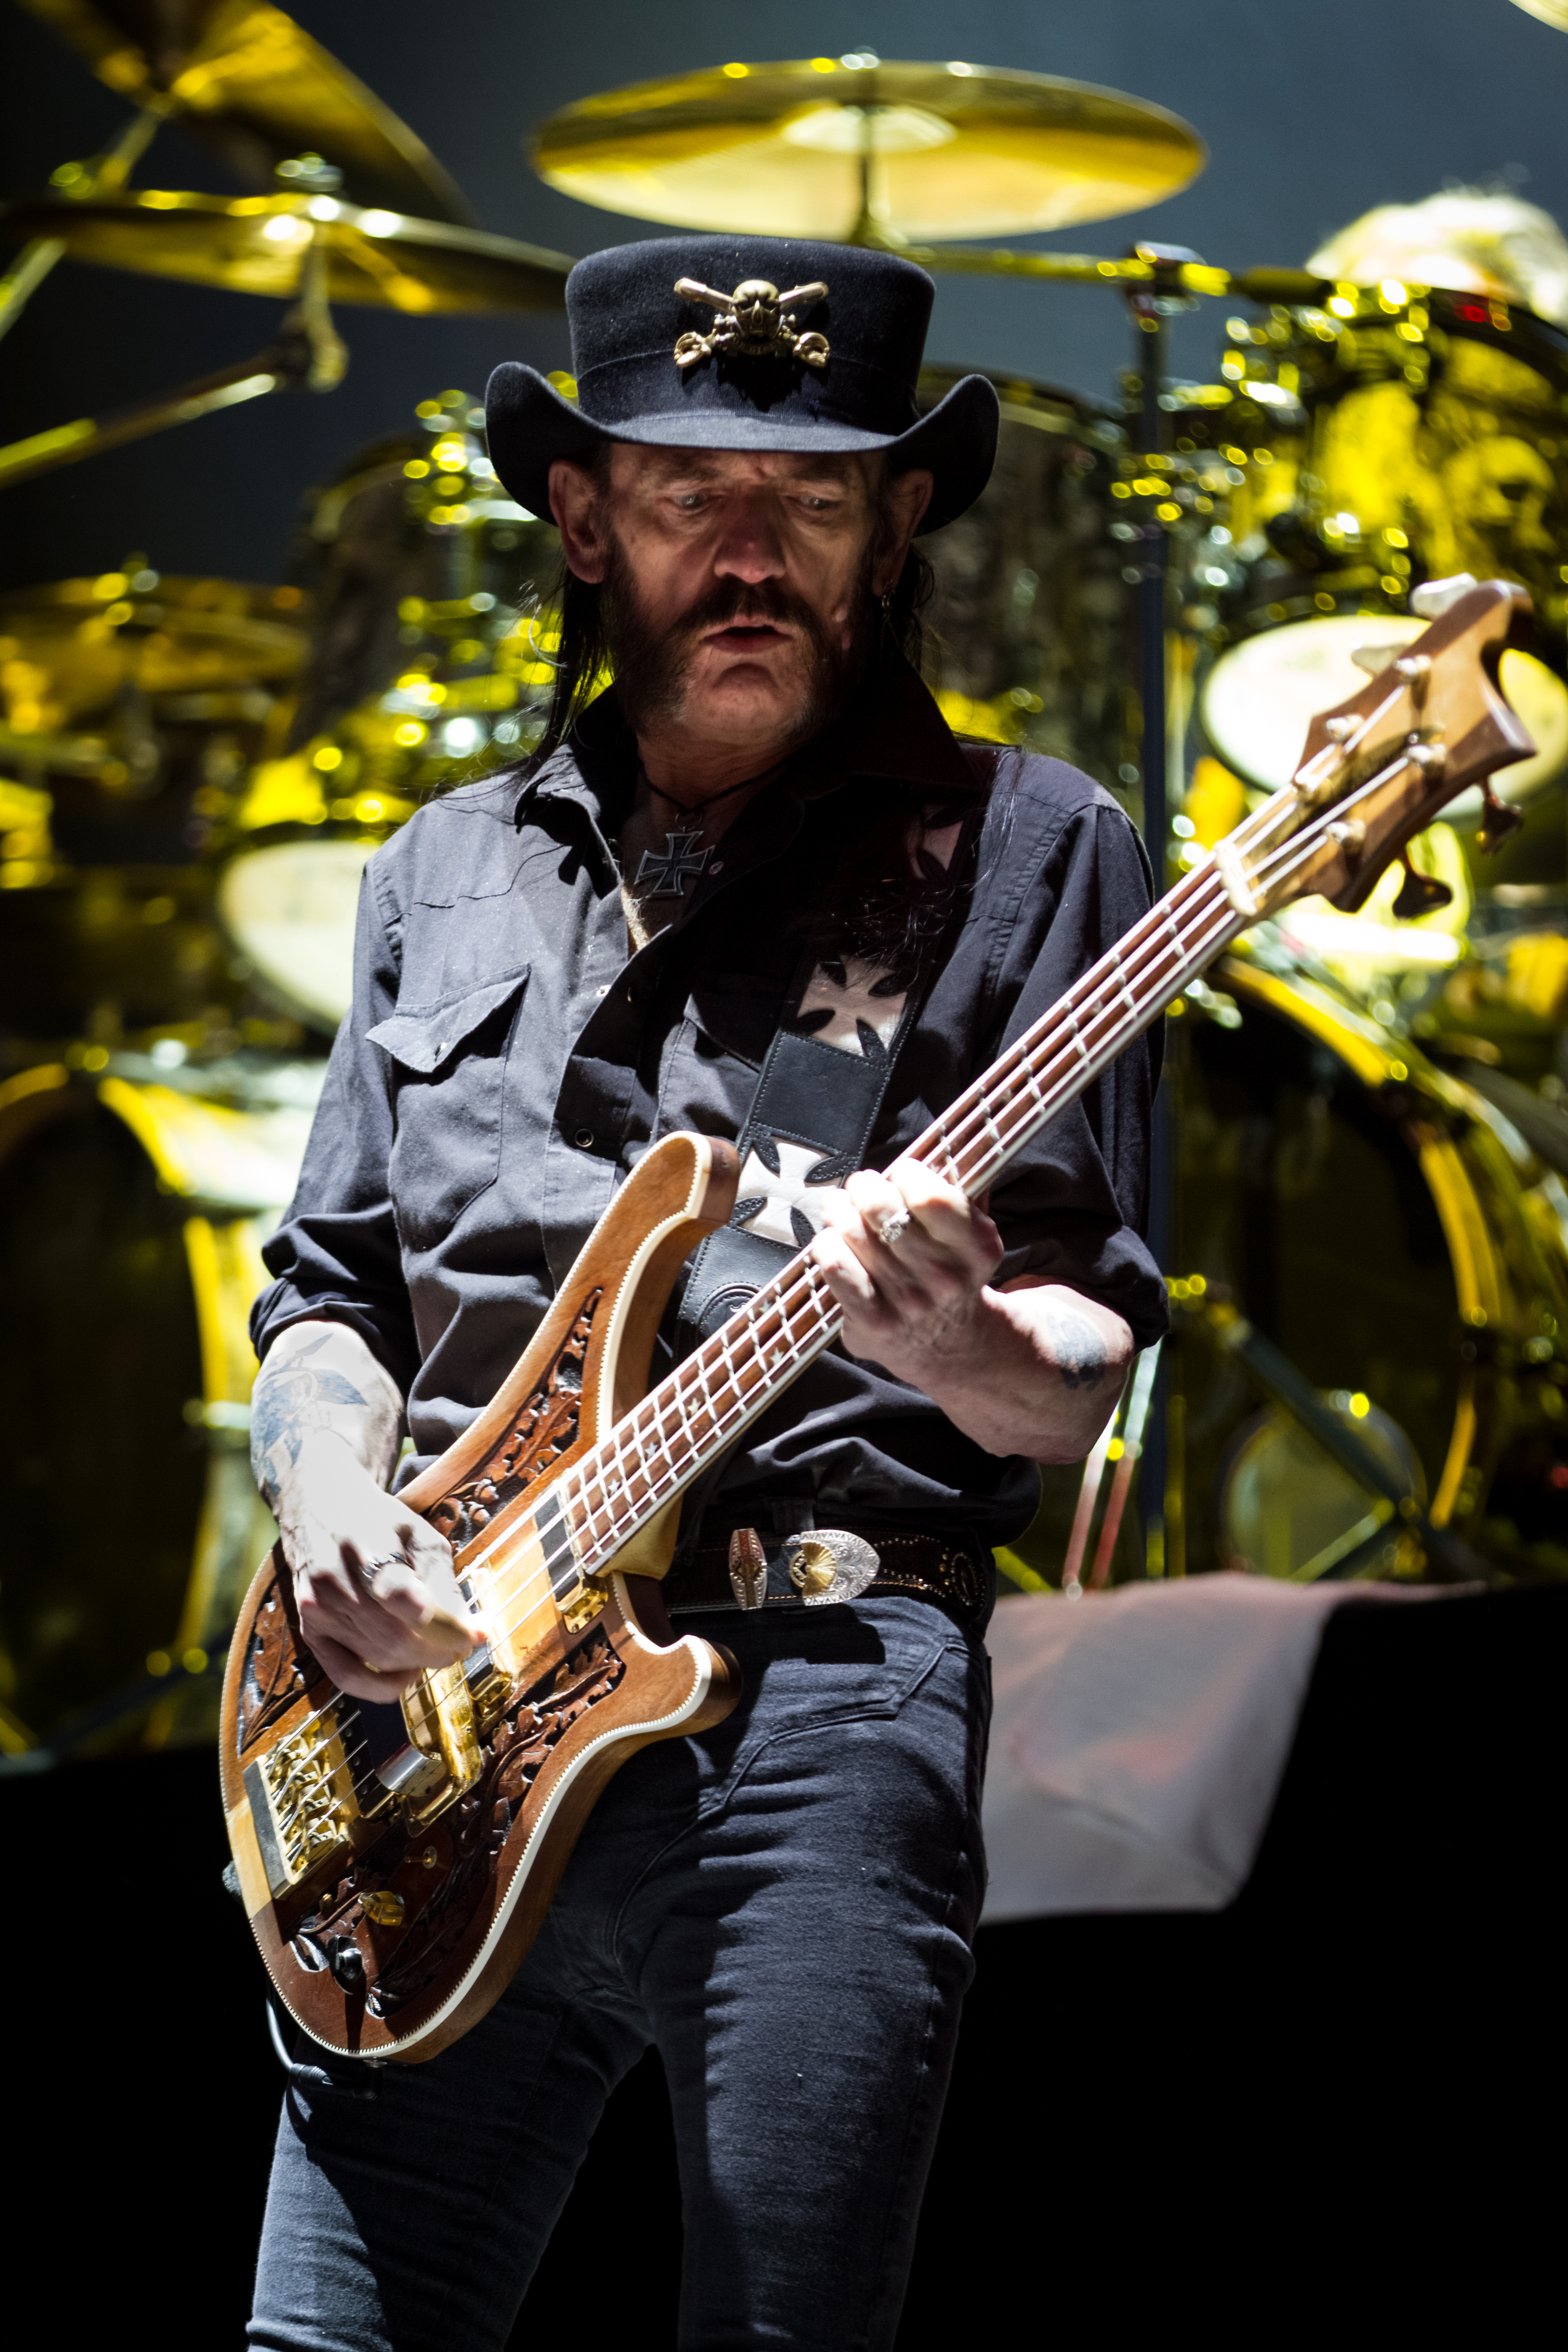 Lemmy in May 2015 at Rock am Ring Germany